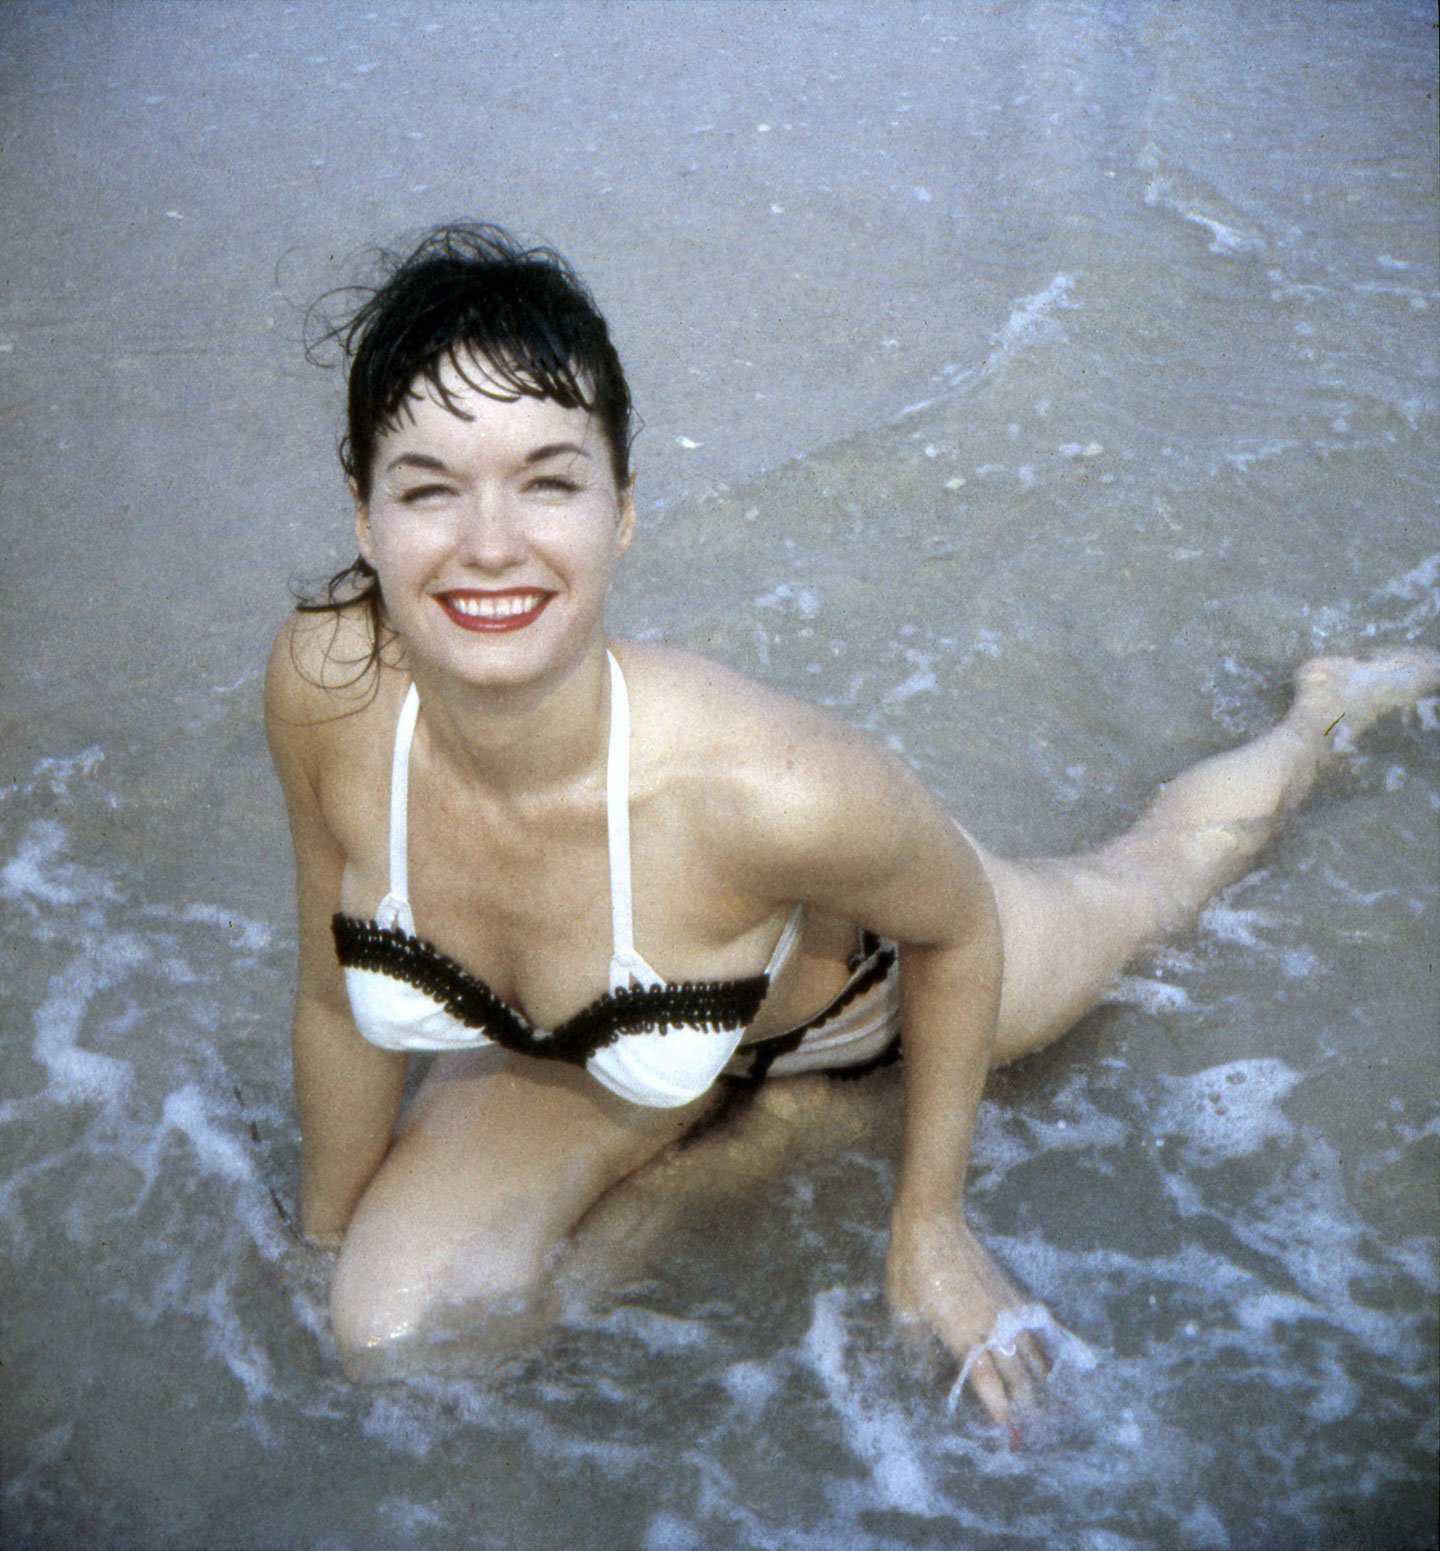 Bettie Page Reveals All': a look at the famous pinup girl